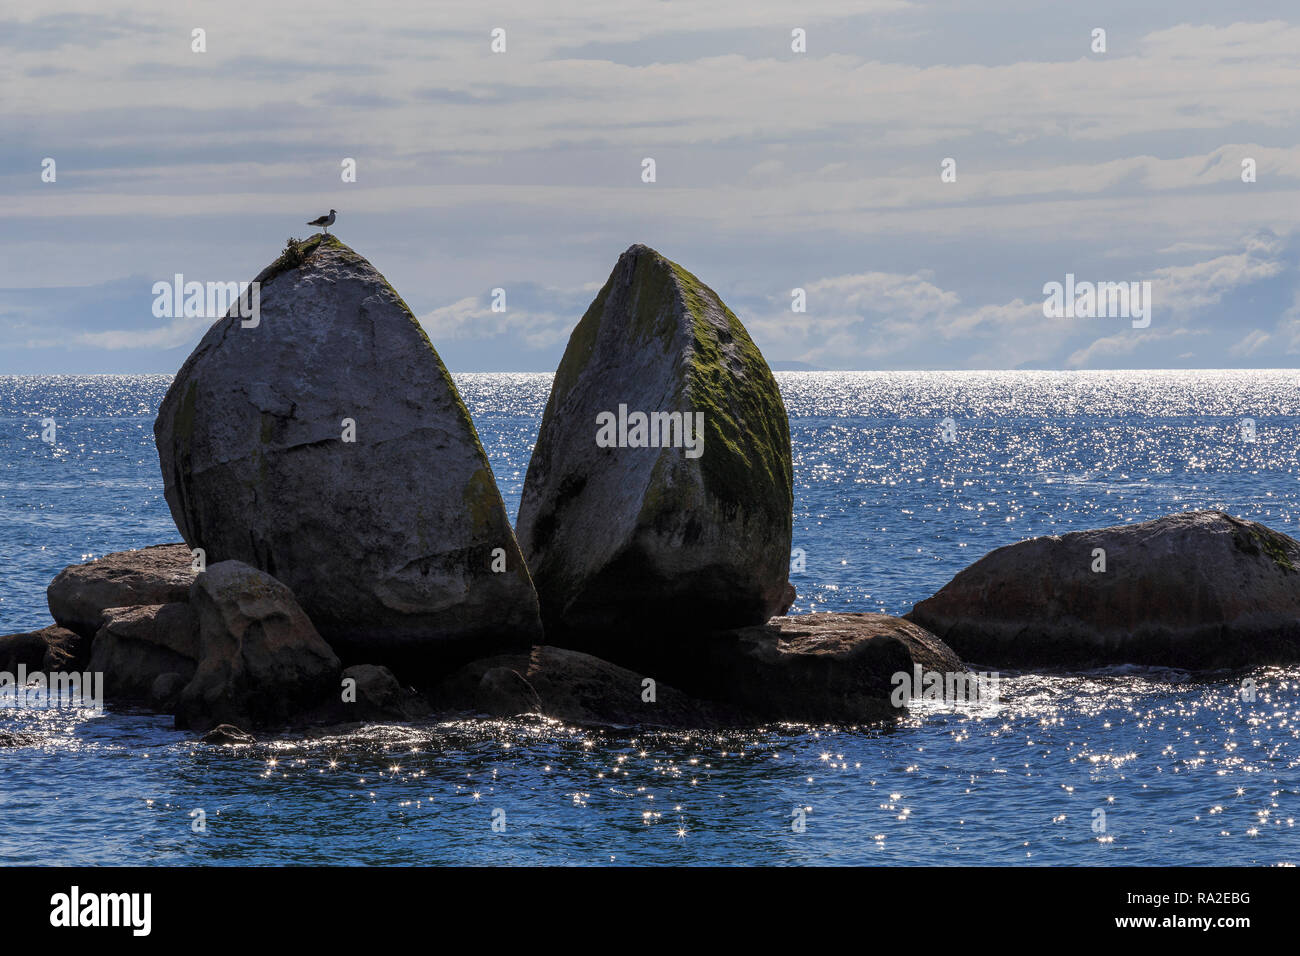 Split Apple Rock seen from the water with black-backed gull on top and sunlight glinting on the water, Abel Tasman National Park. Stock Photo